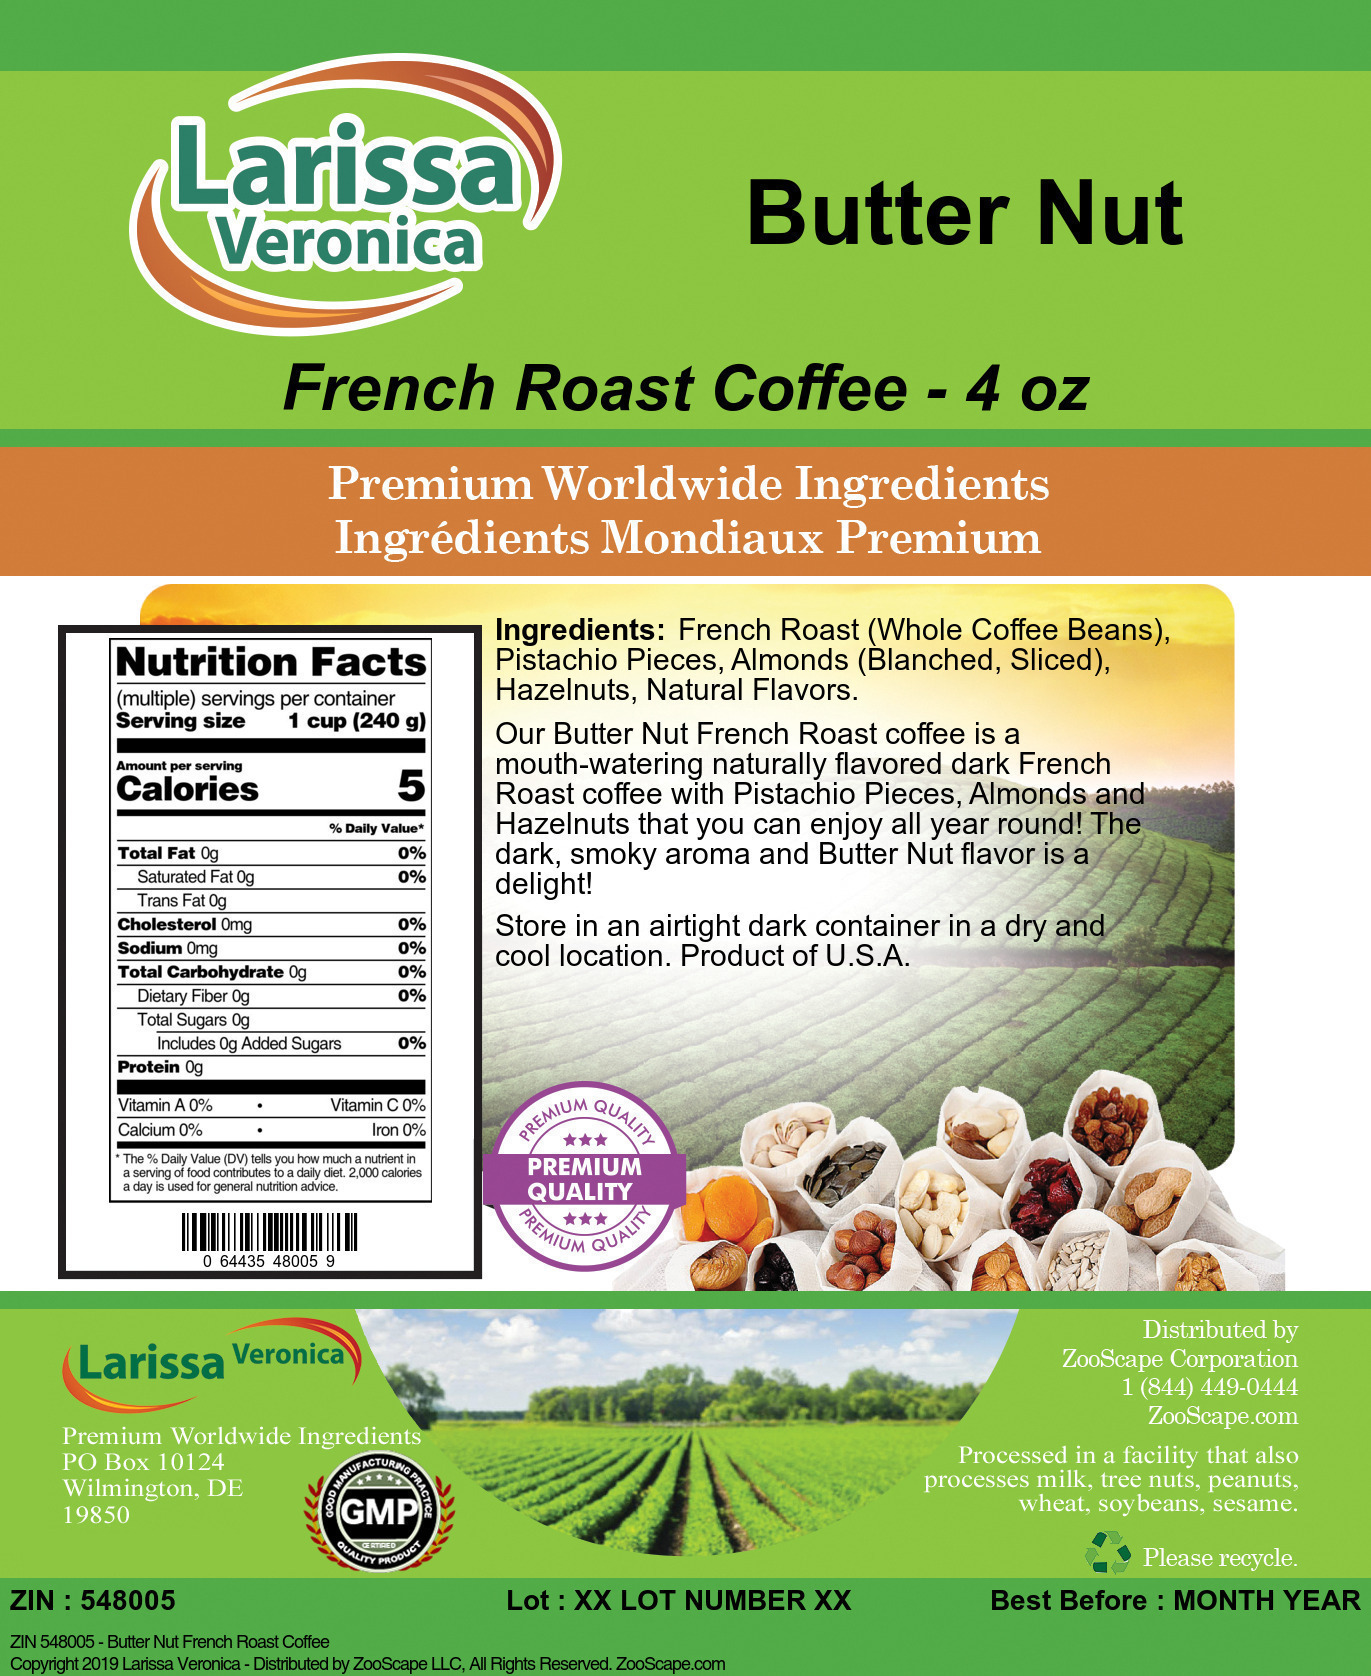 Butter Nut French Roast Coffee - Label